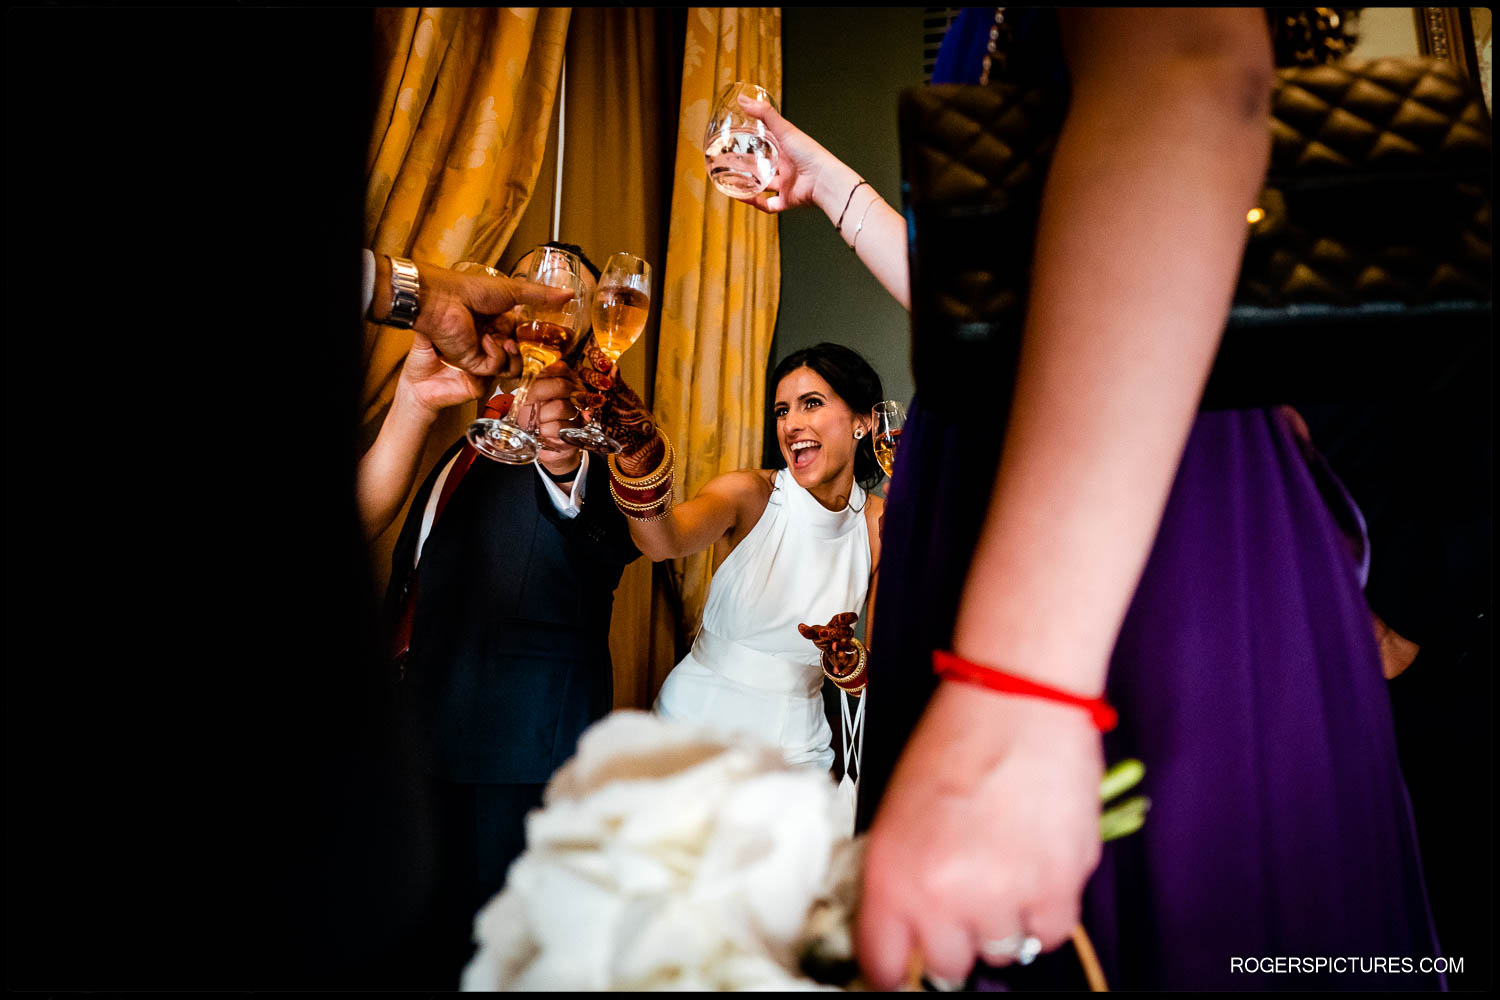 Bride drinking champagne with friends